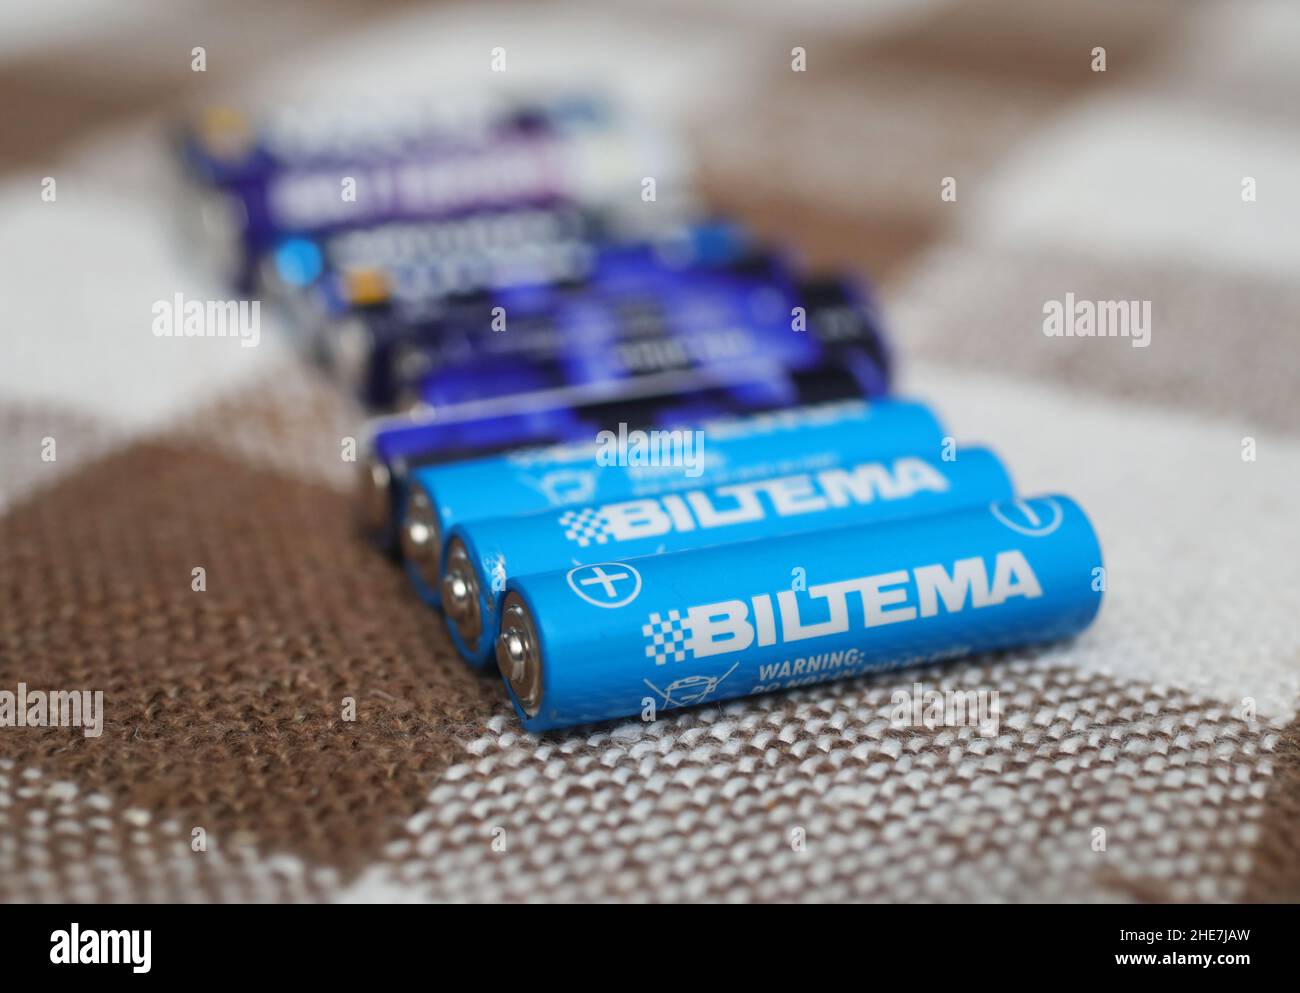 Different types of batteries, including from Biltema Stock Photo - Alamy